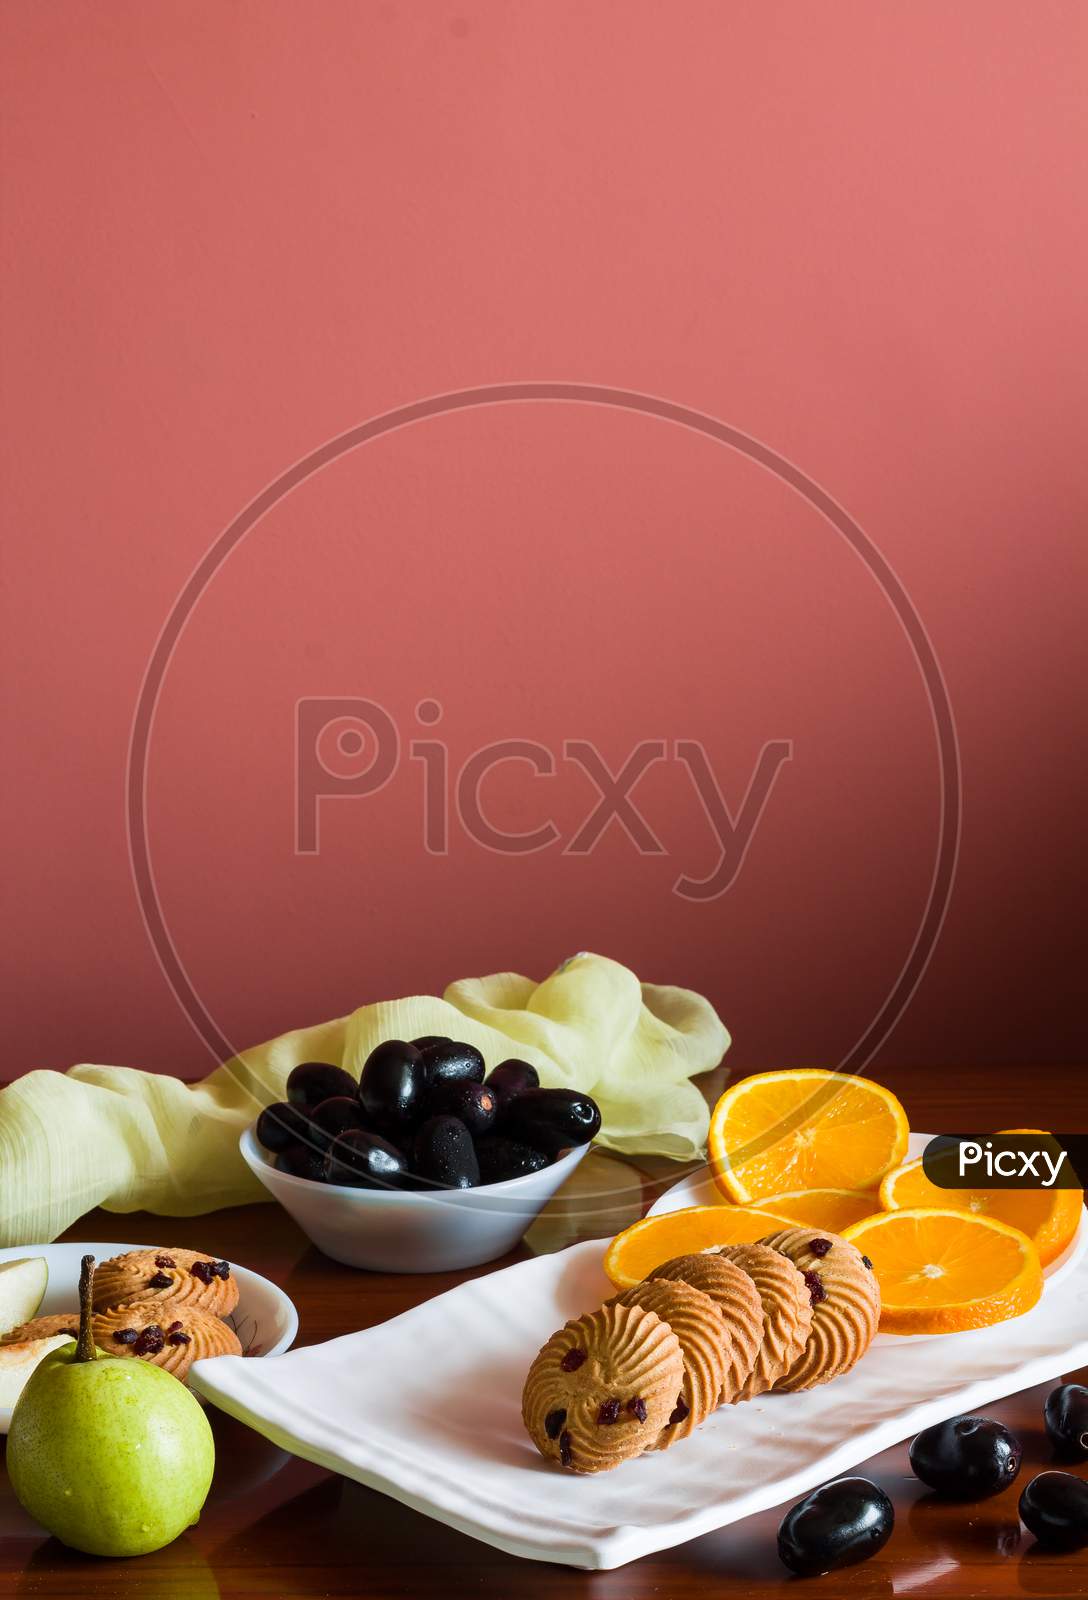 Front view of assortment of fruits in a fruit platter with orange slices,jamun,pears and oats cookies. Healthy mix.Vertical.